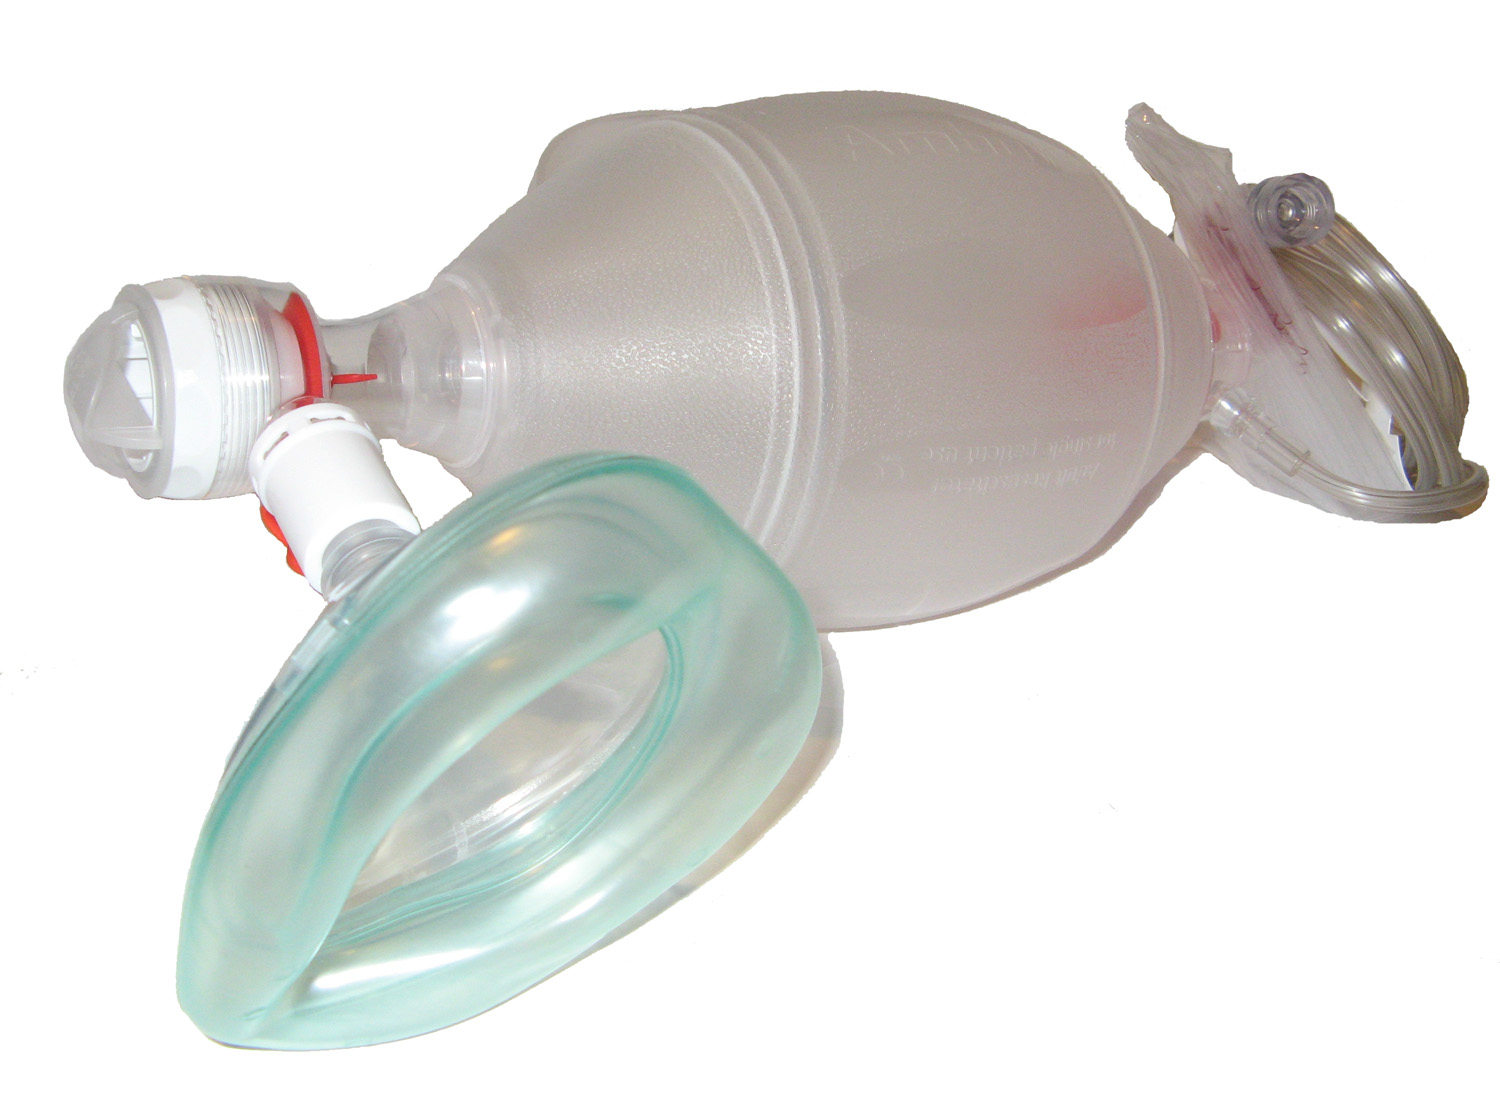 Effect of Bag-Mask Ventilation vs Endotracheal Intubation During Cardiopulmonary Resuscitation on Neurological Outcome After Out-of-Hospital Cardiorespiratory Arrest: A Randomized Clinical Trial